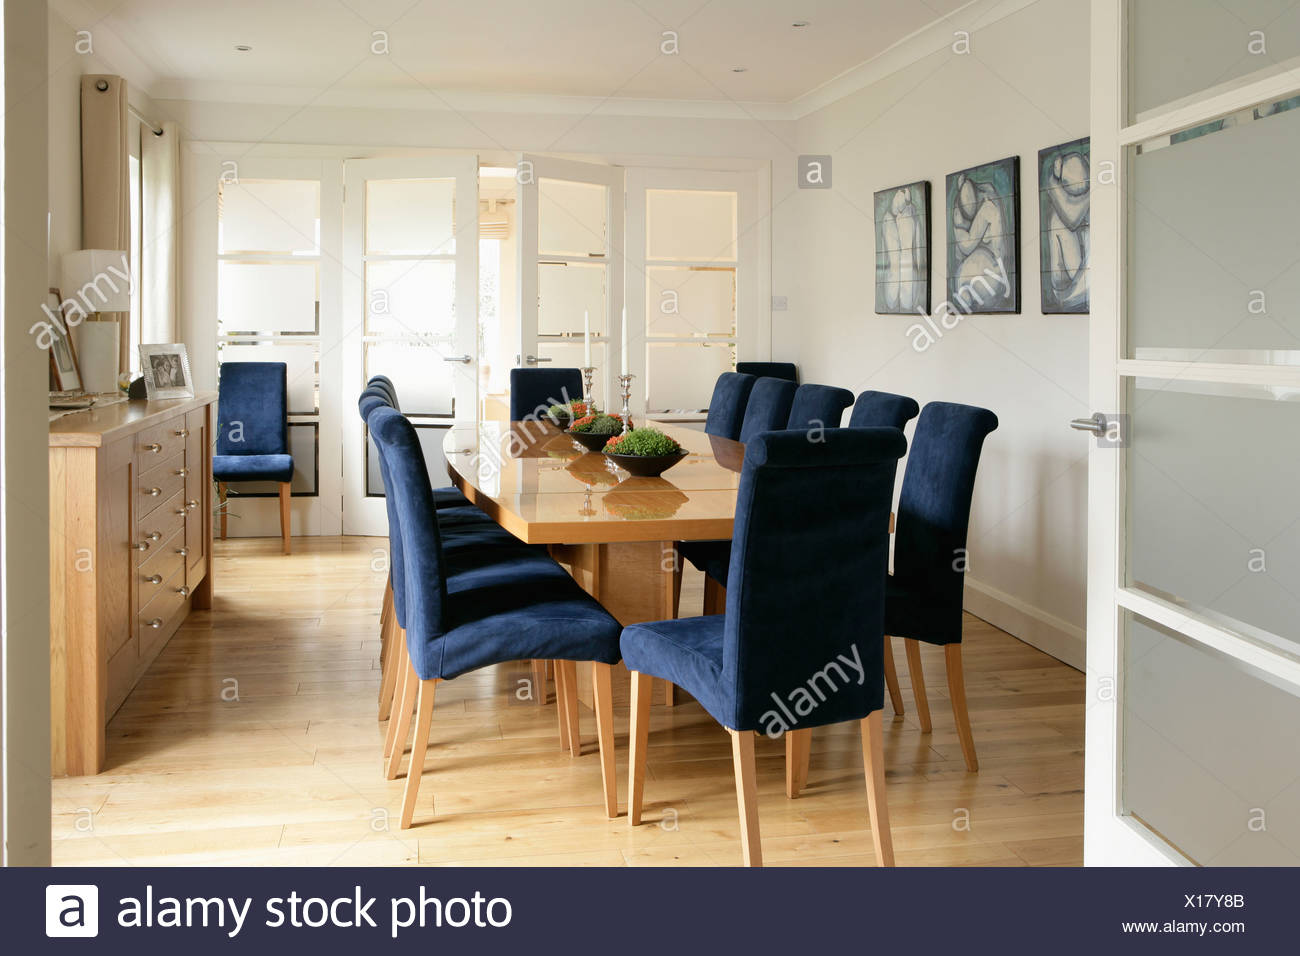 Glazed Door Open To Modern Dining Room With Blue Upholstered Chairs And Pale Wood Table And Wooden Flooring Stock Photo Alamy